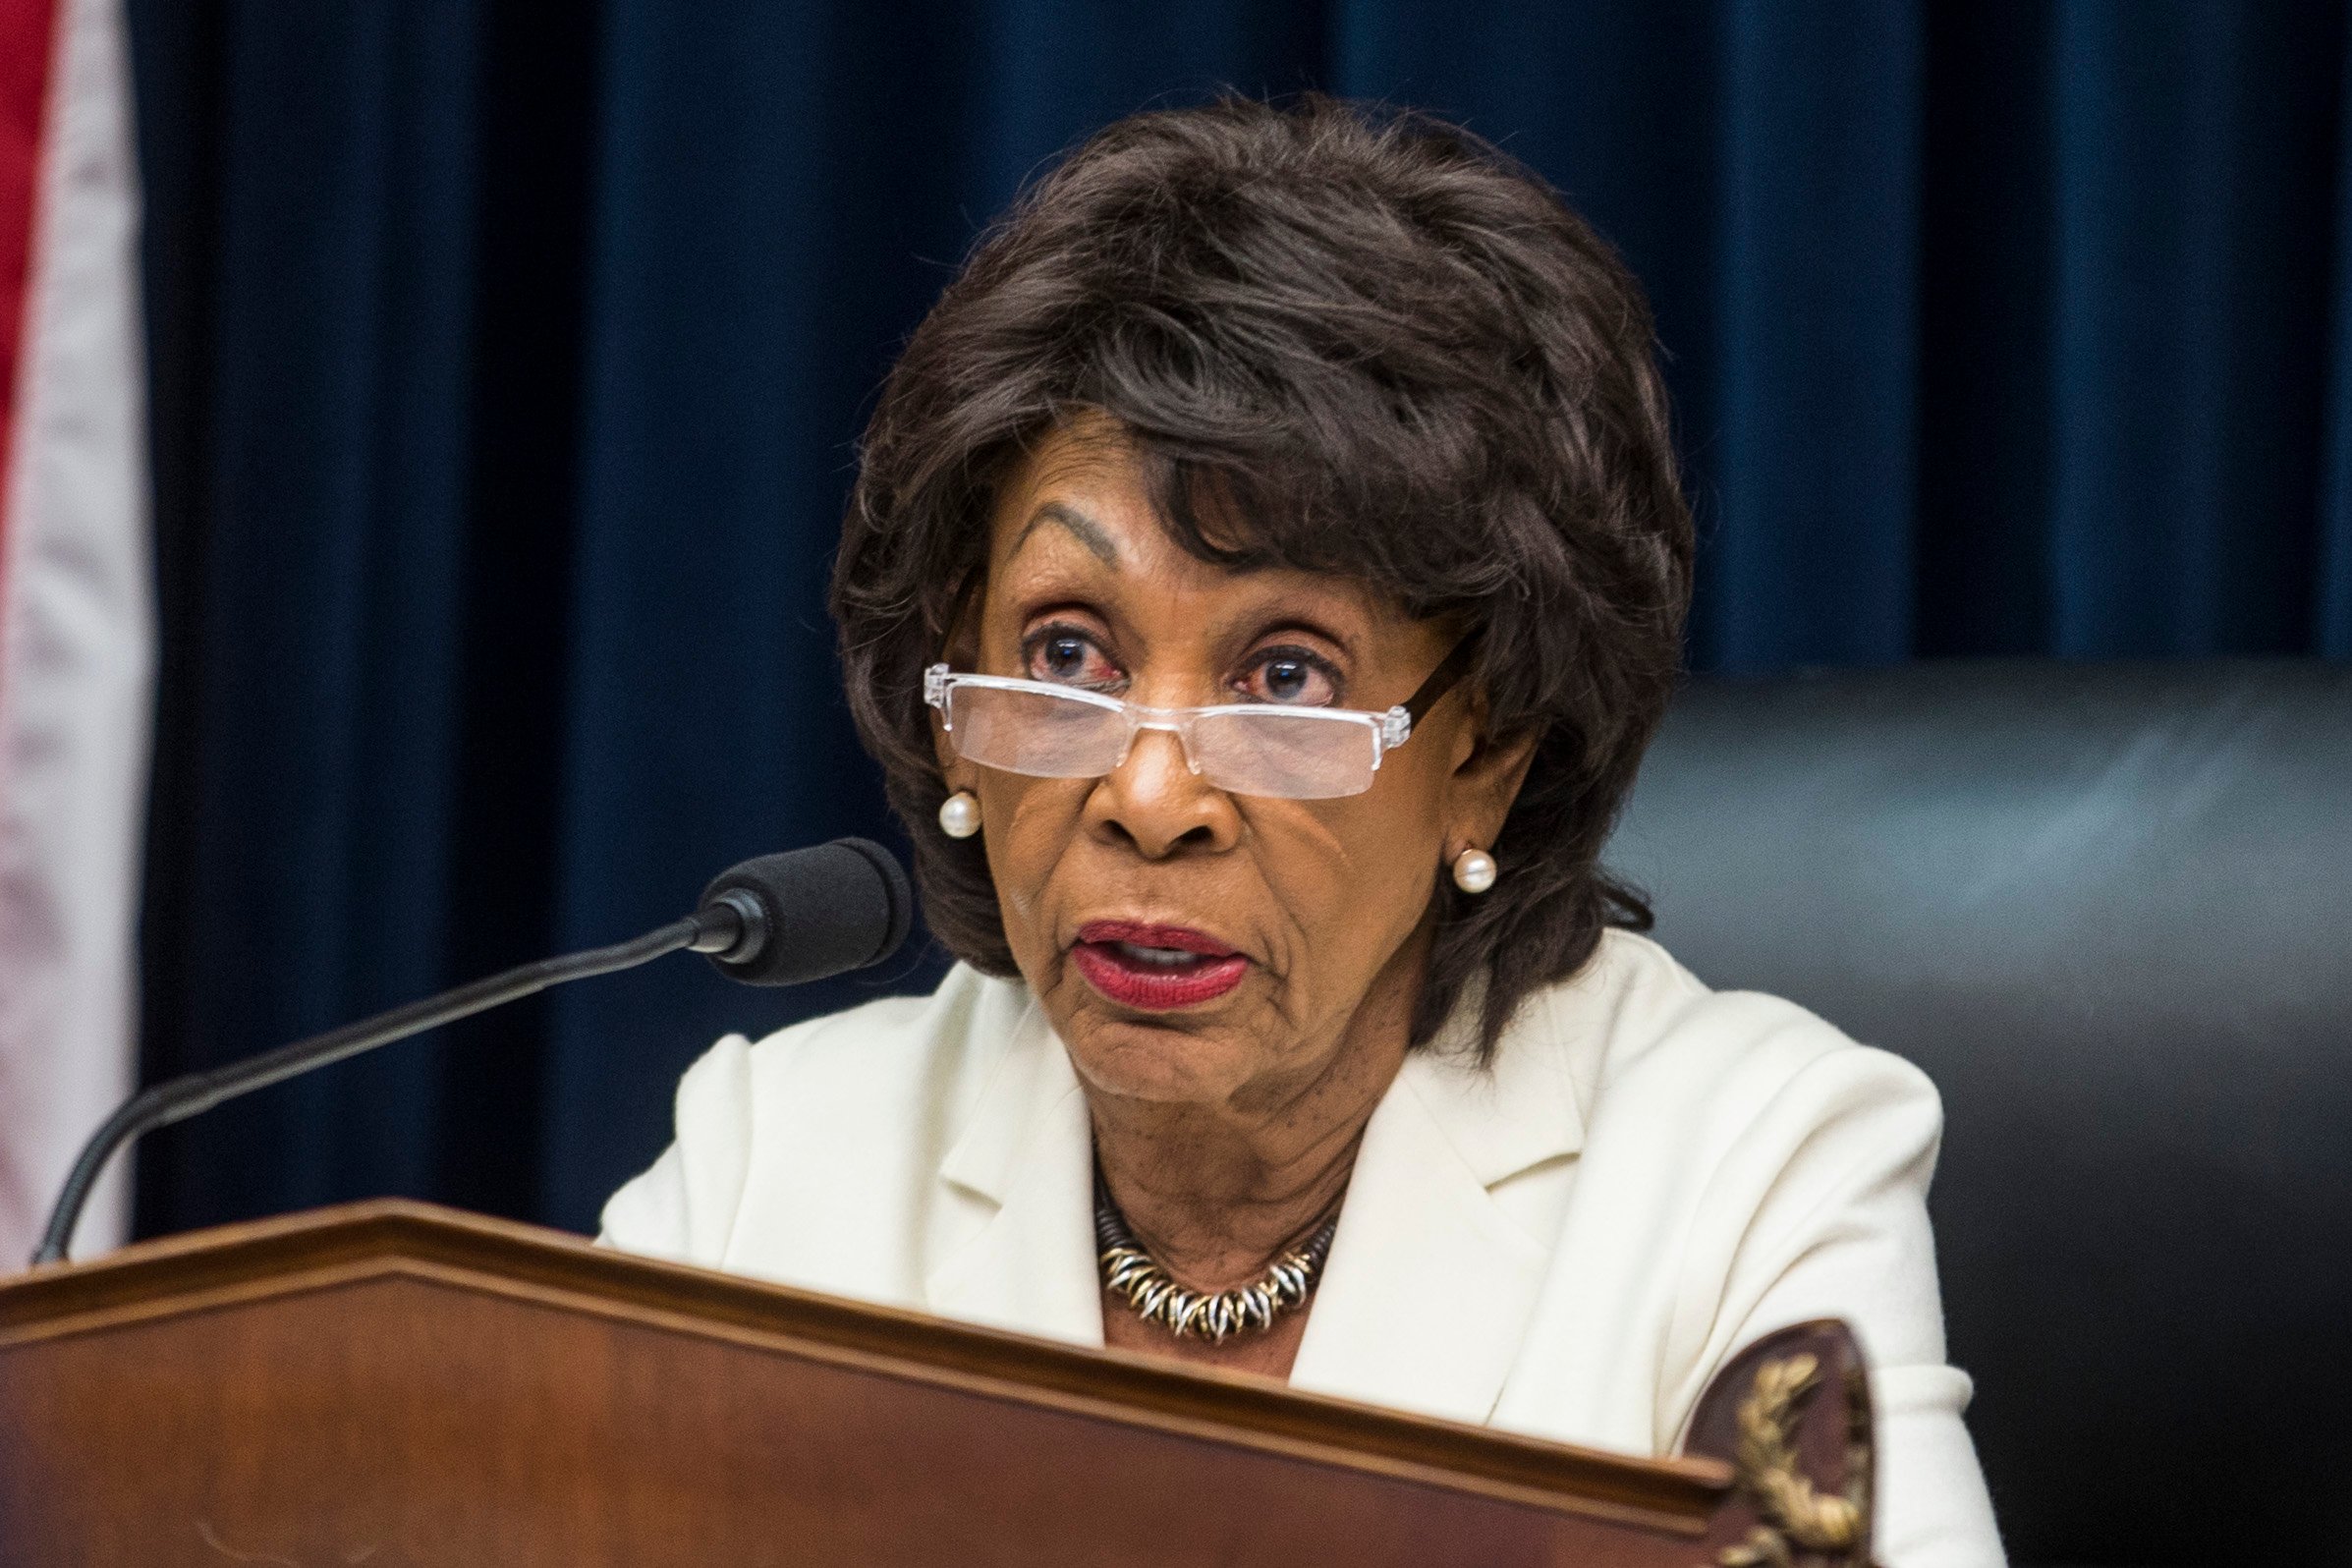 WASHINGTON, DC - APRIL 09: House Financial Services Committee Chairman Maxine Waters (D-CA) speaks during a House Financial Services Committee Hearing on Capitol Hill on April 9, 2019 in Washington, DC. U.S. Secretary of Treasury Steve Mnuchin is testifying on the state of the international financial system. (Photo by Zach Gibson/Getty Images)